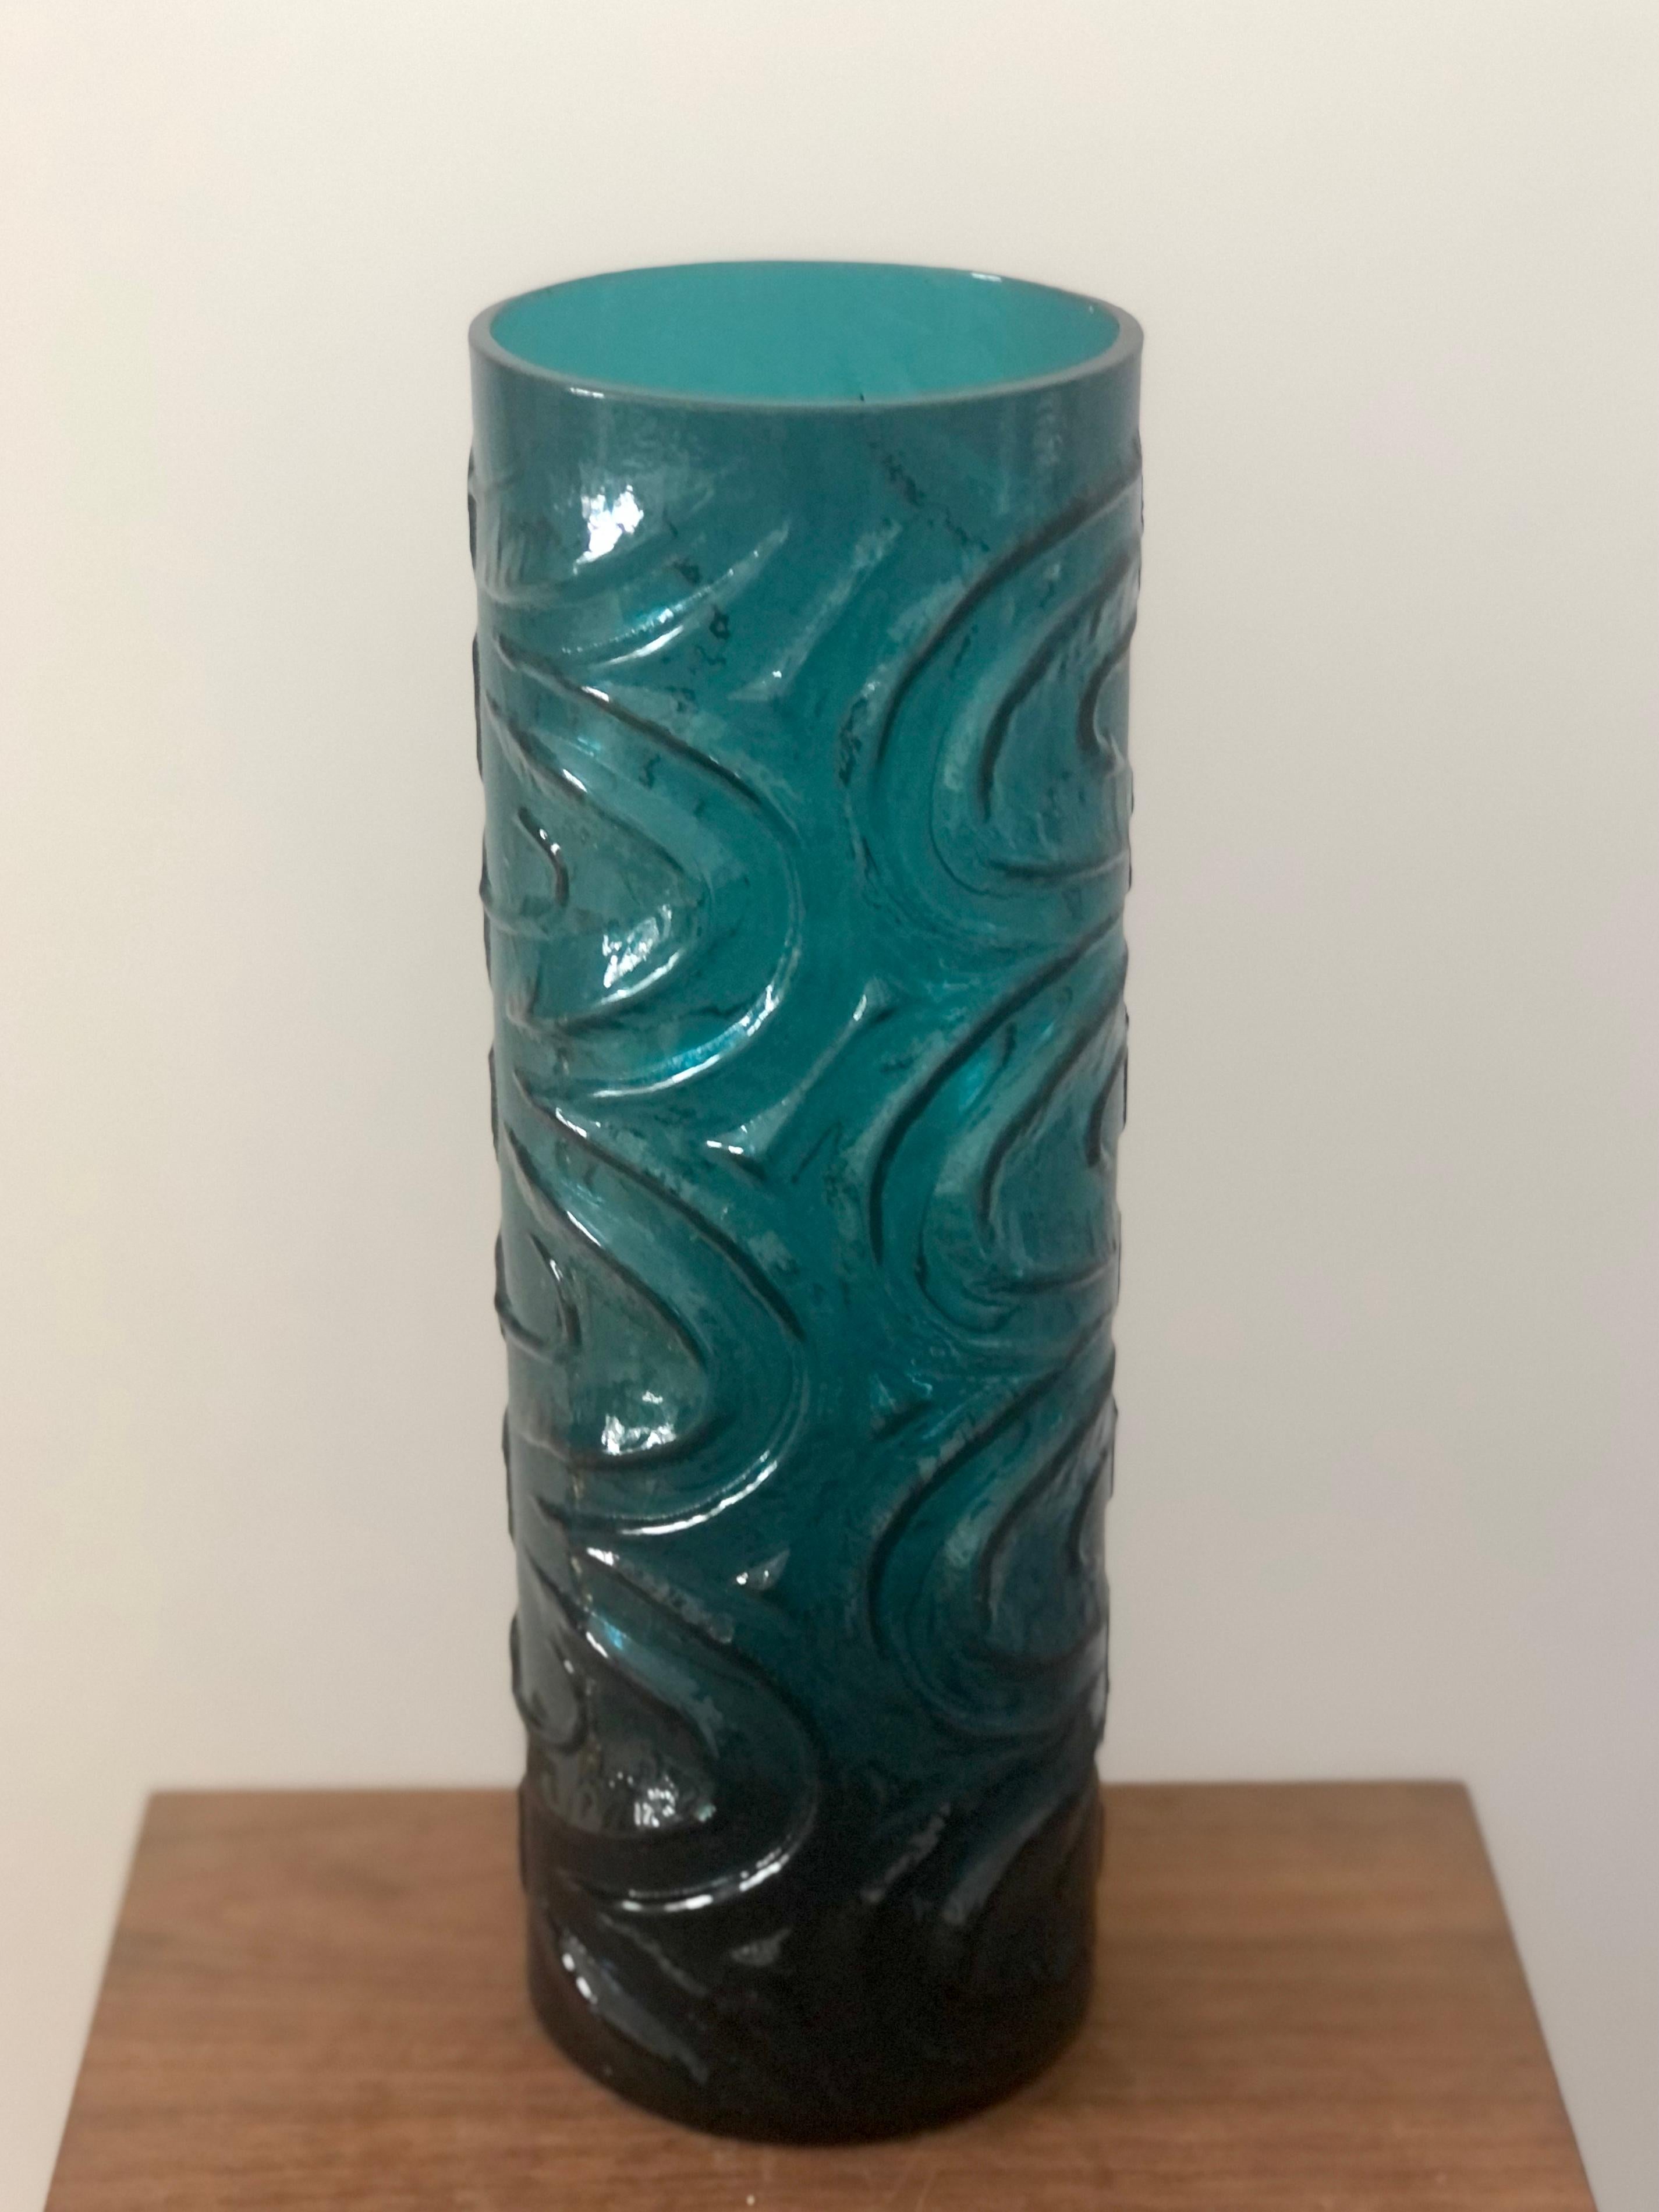 Vintage large Mid-Century Modern vase in stunning kingfisher blue. Cylindrical in form made using a two-part mold with a vertical wave design, by Empoli, Italy in the 1960s.